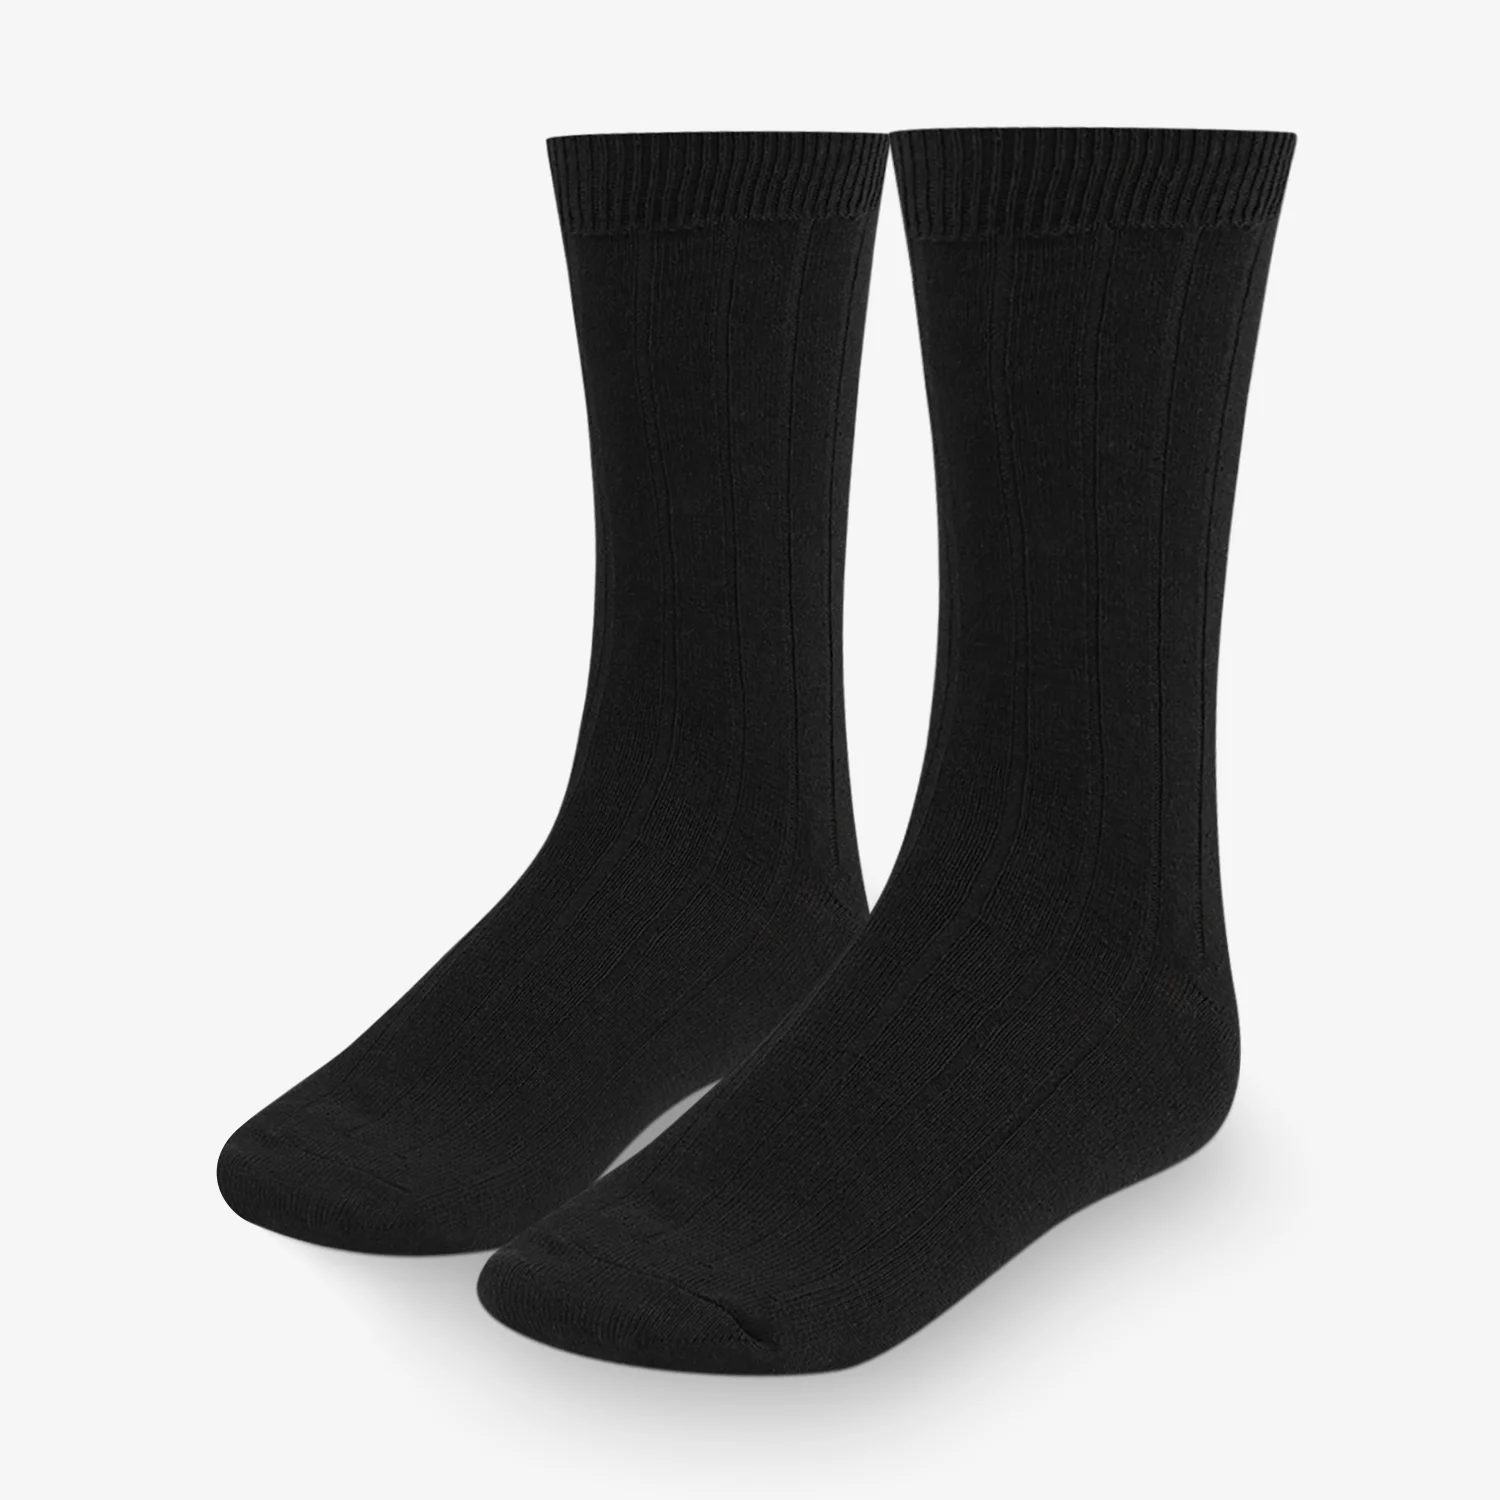 A pair of 3 Pair Boys Black Dress Socks Cotton Blend on a white background.